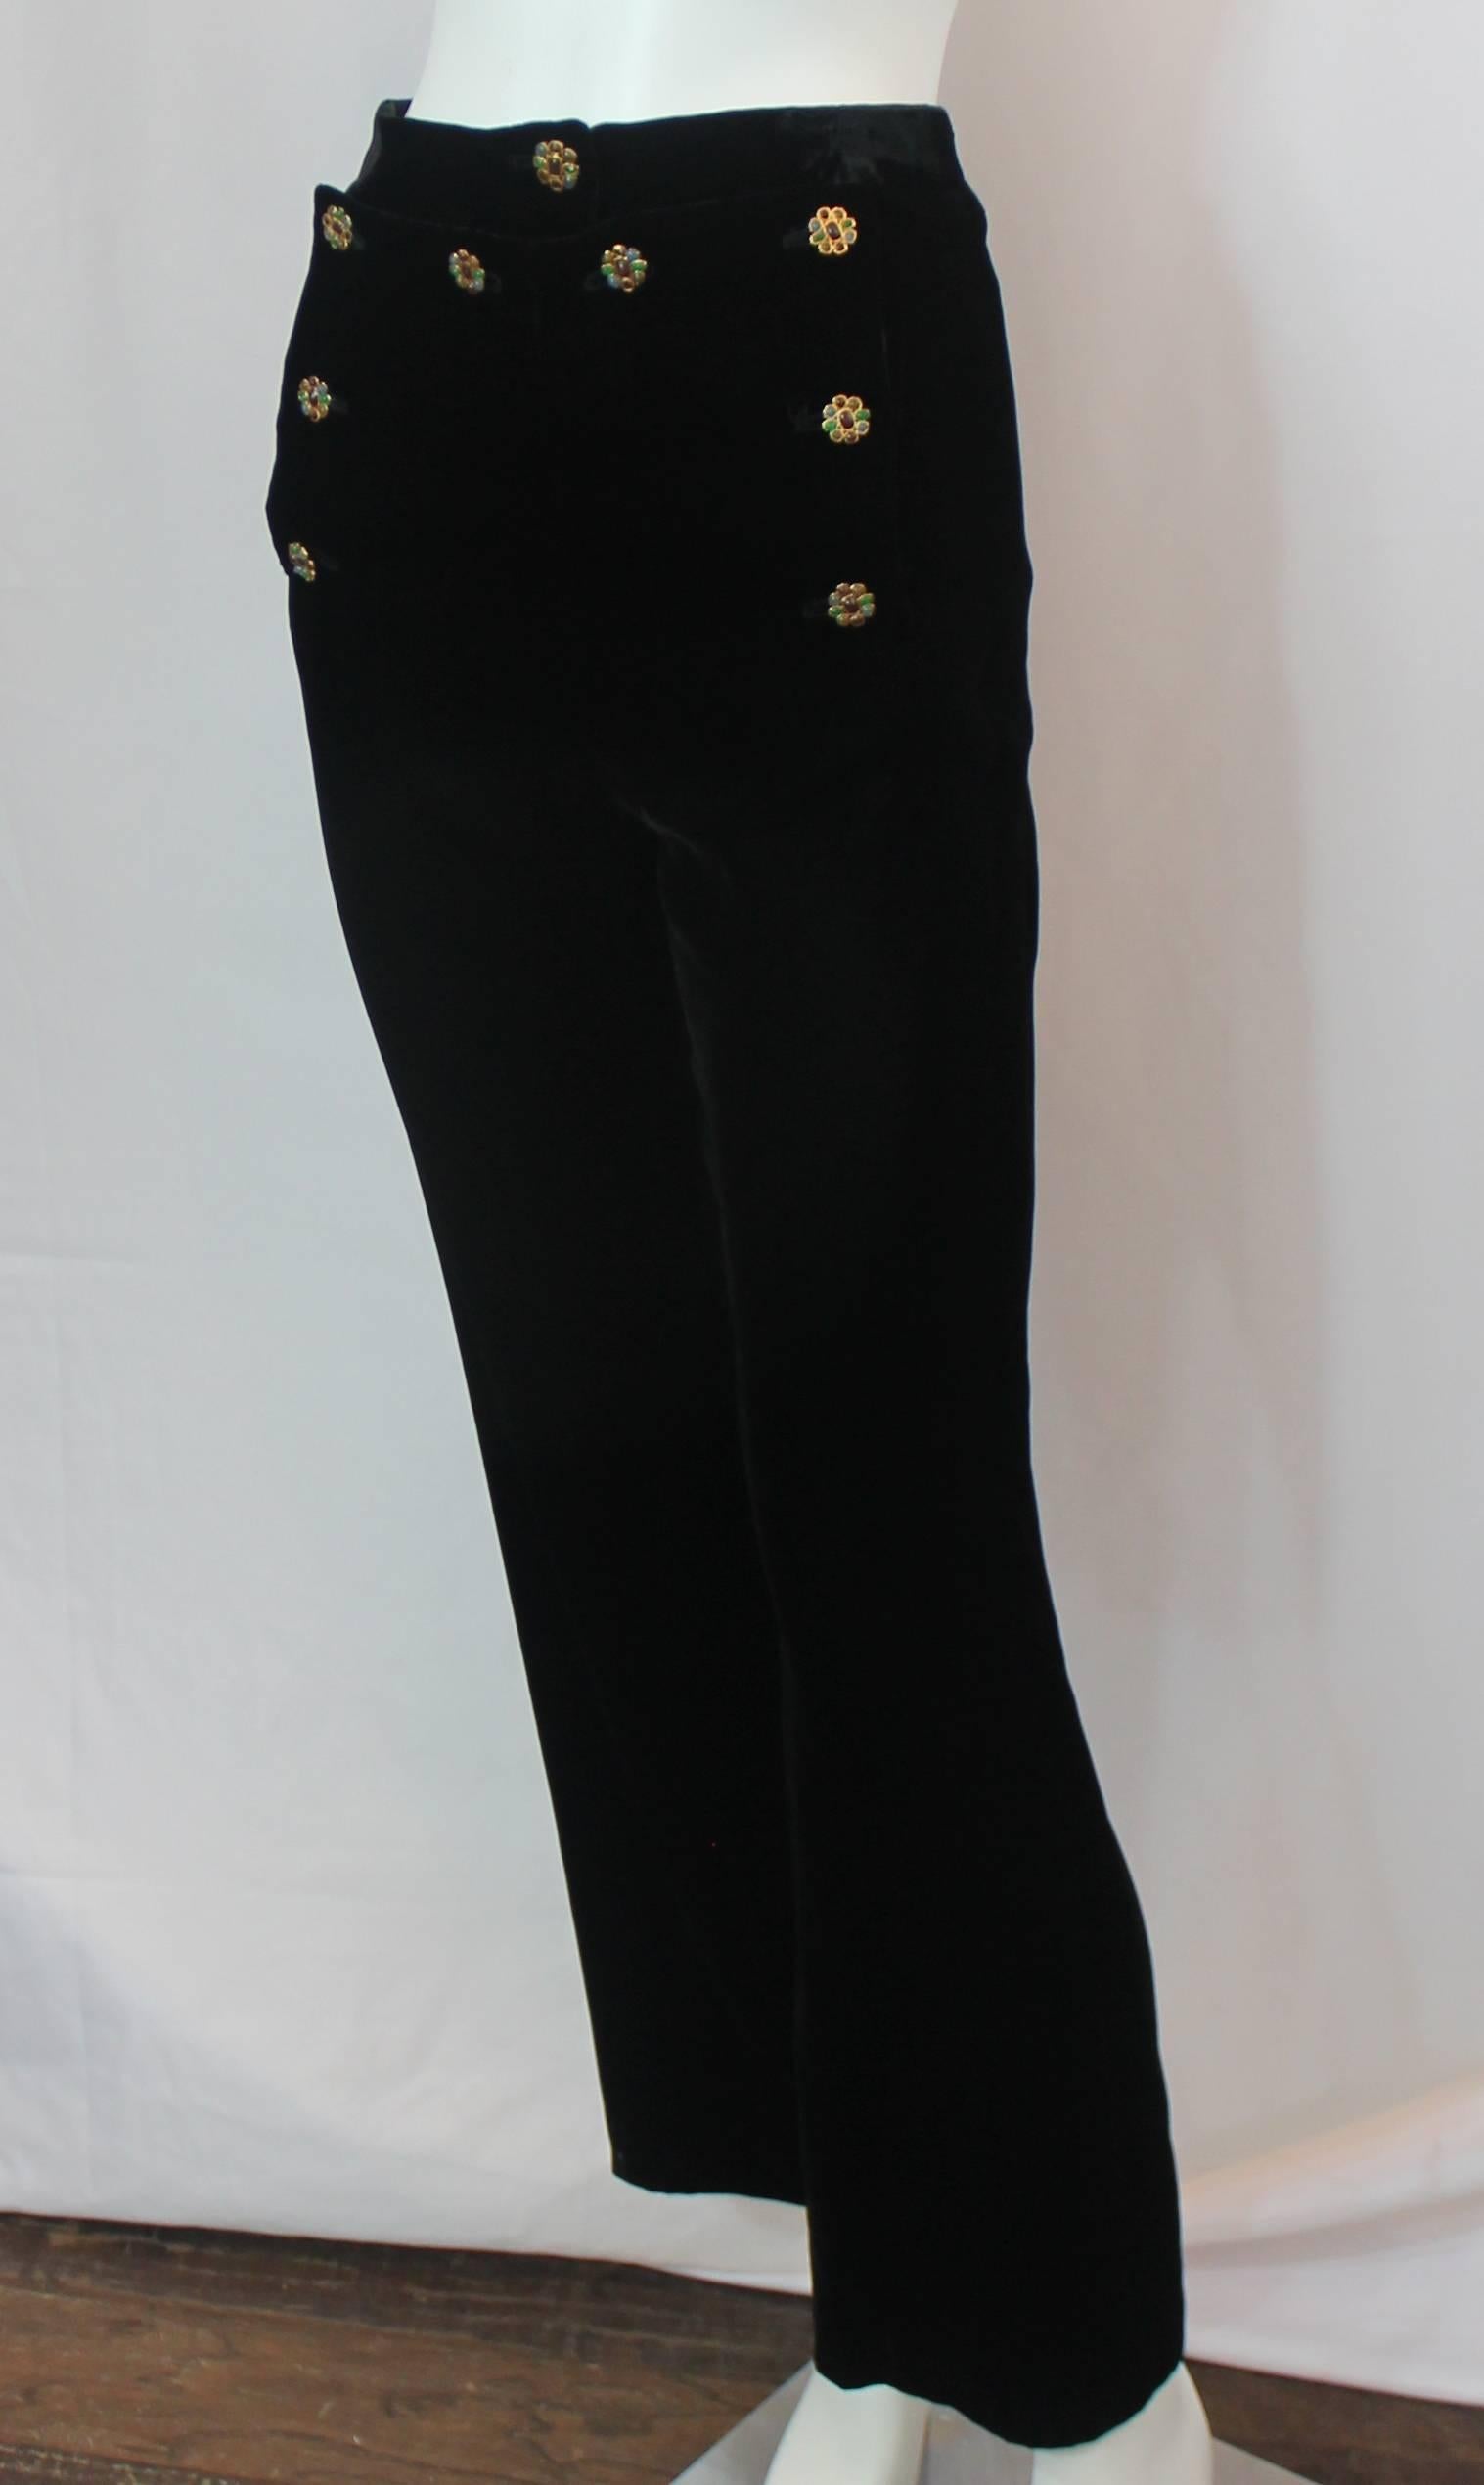 Chanel Black Velvet Sailor Style Pants with Gripoix Buttons - 34 - 1980's. These high waisted pants have beautiful sailor style gripoix buttons (different colored stones). The pants flare at the bottom. They are in excellent vintage condition with